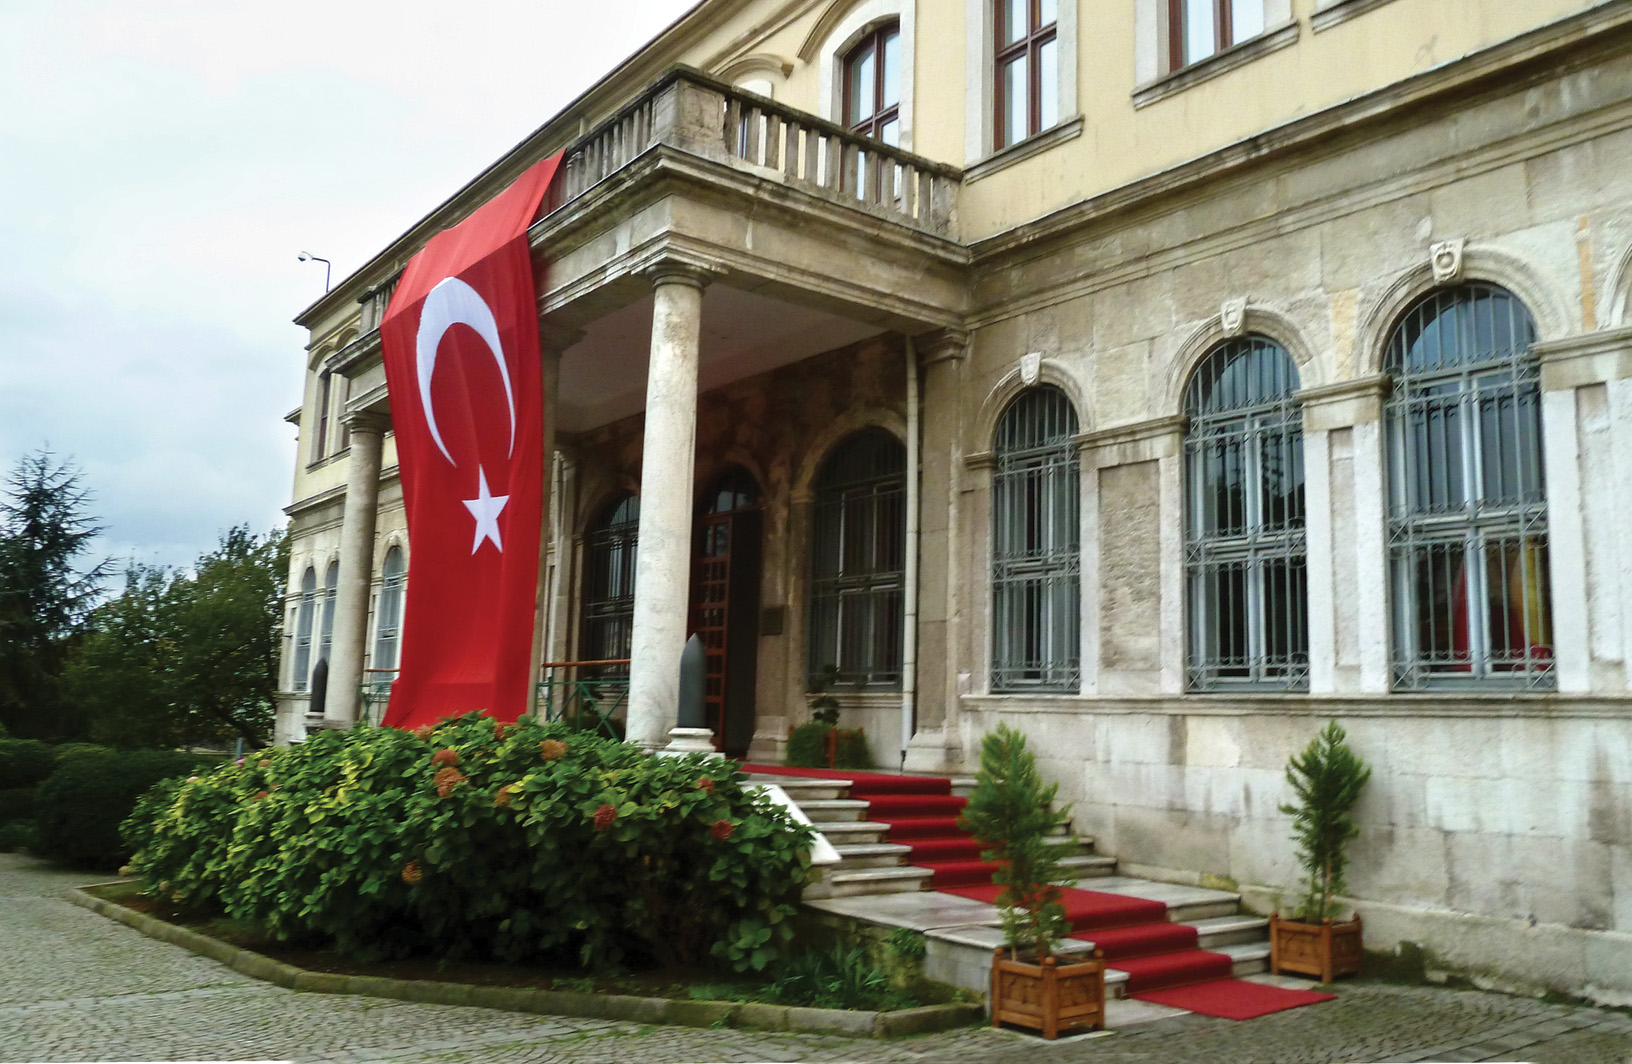 The exterior of Istanbul’s military museum, the Askeri Müze.